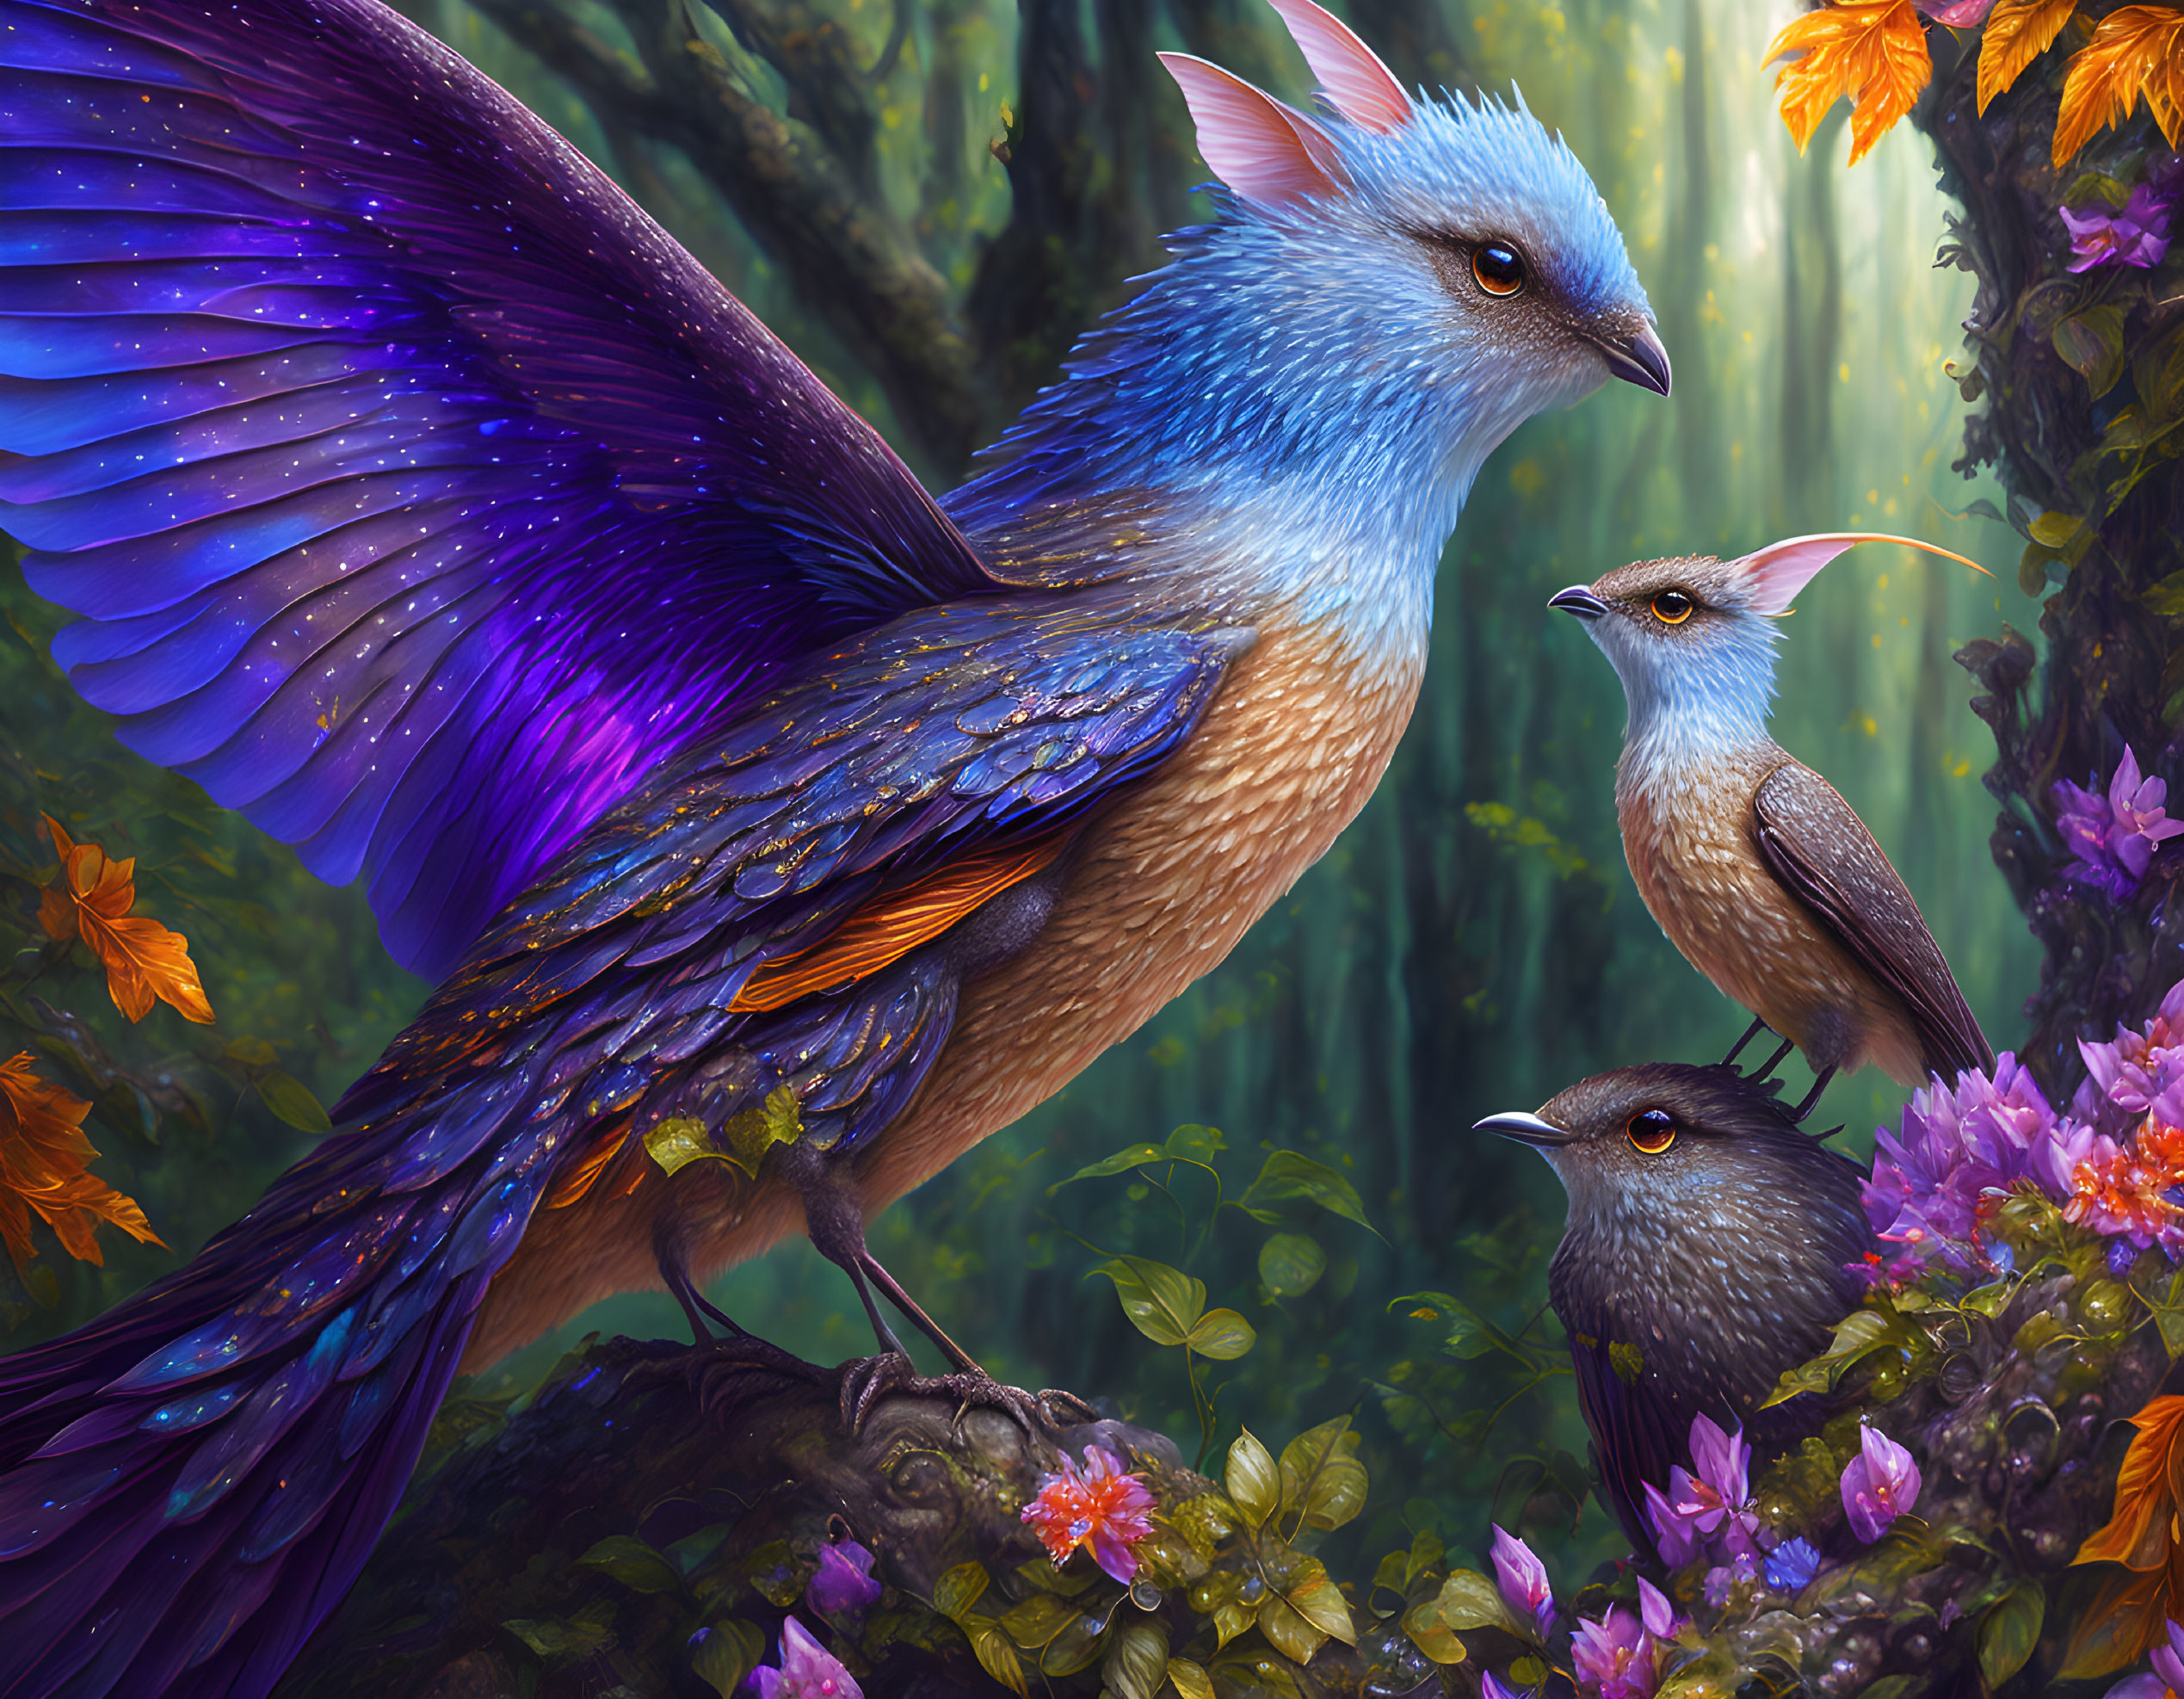 Colorful digital artwork of mythical bird and forest scene